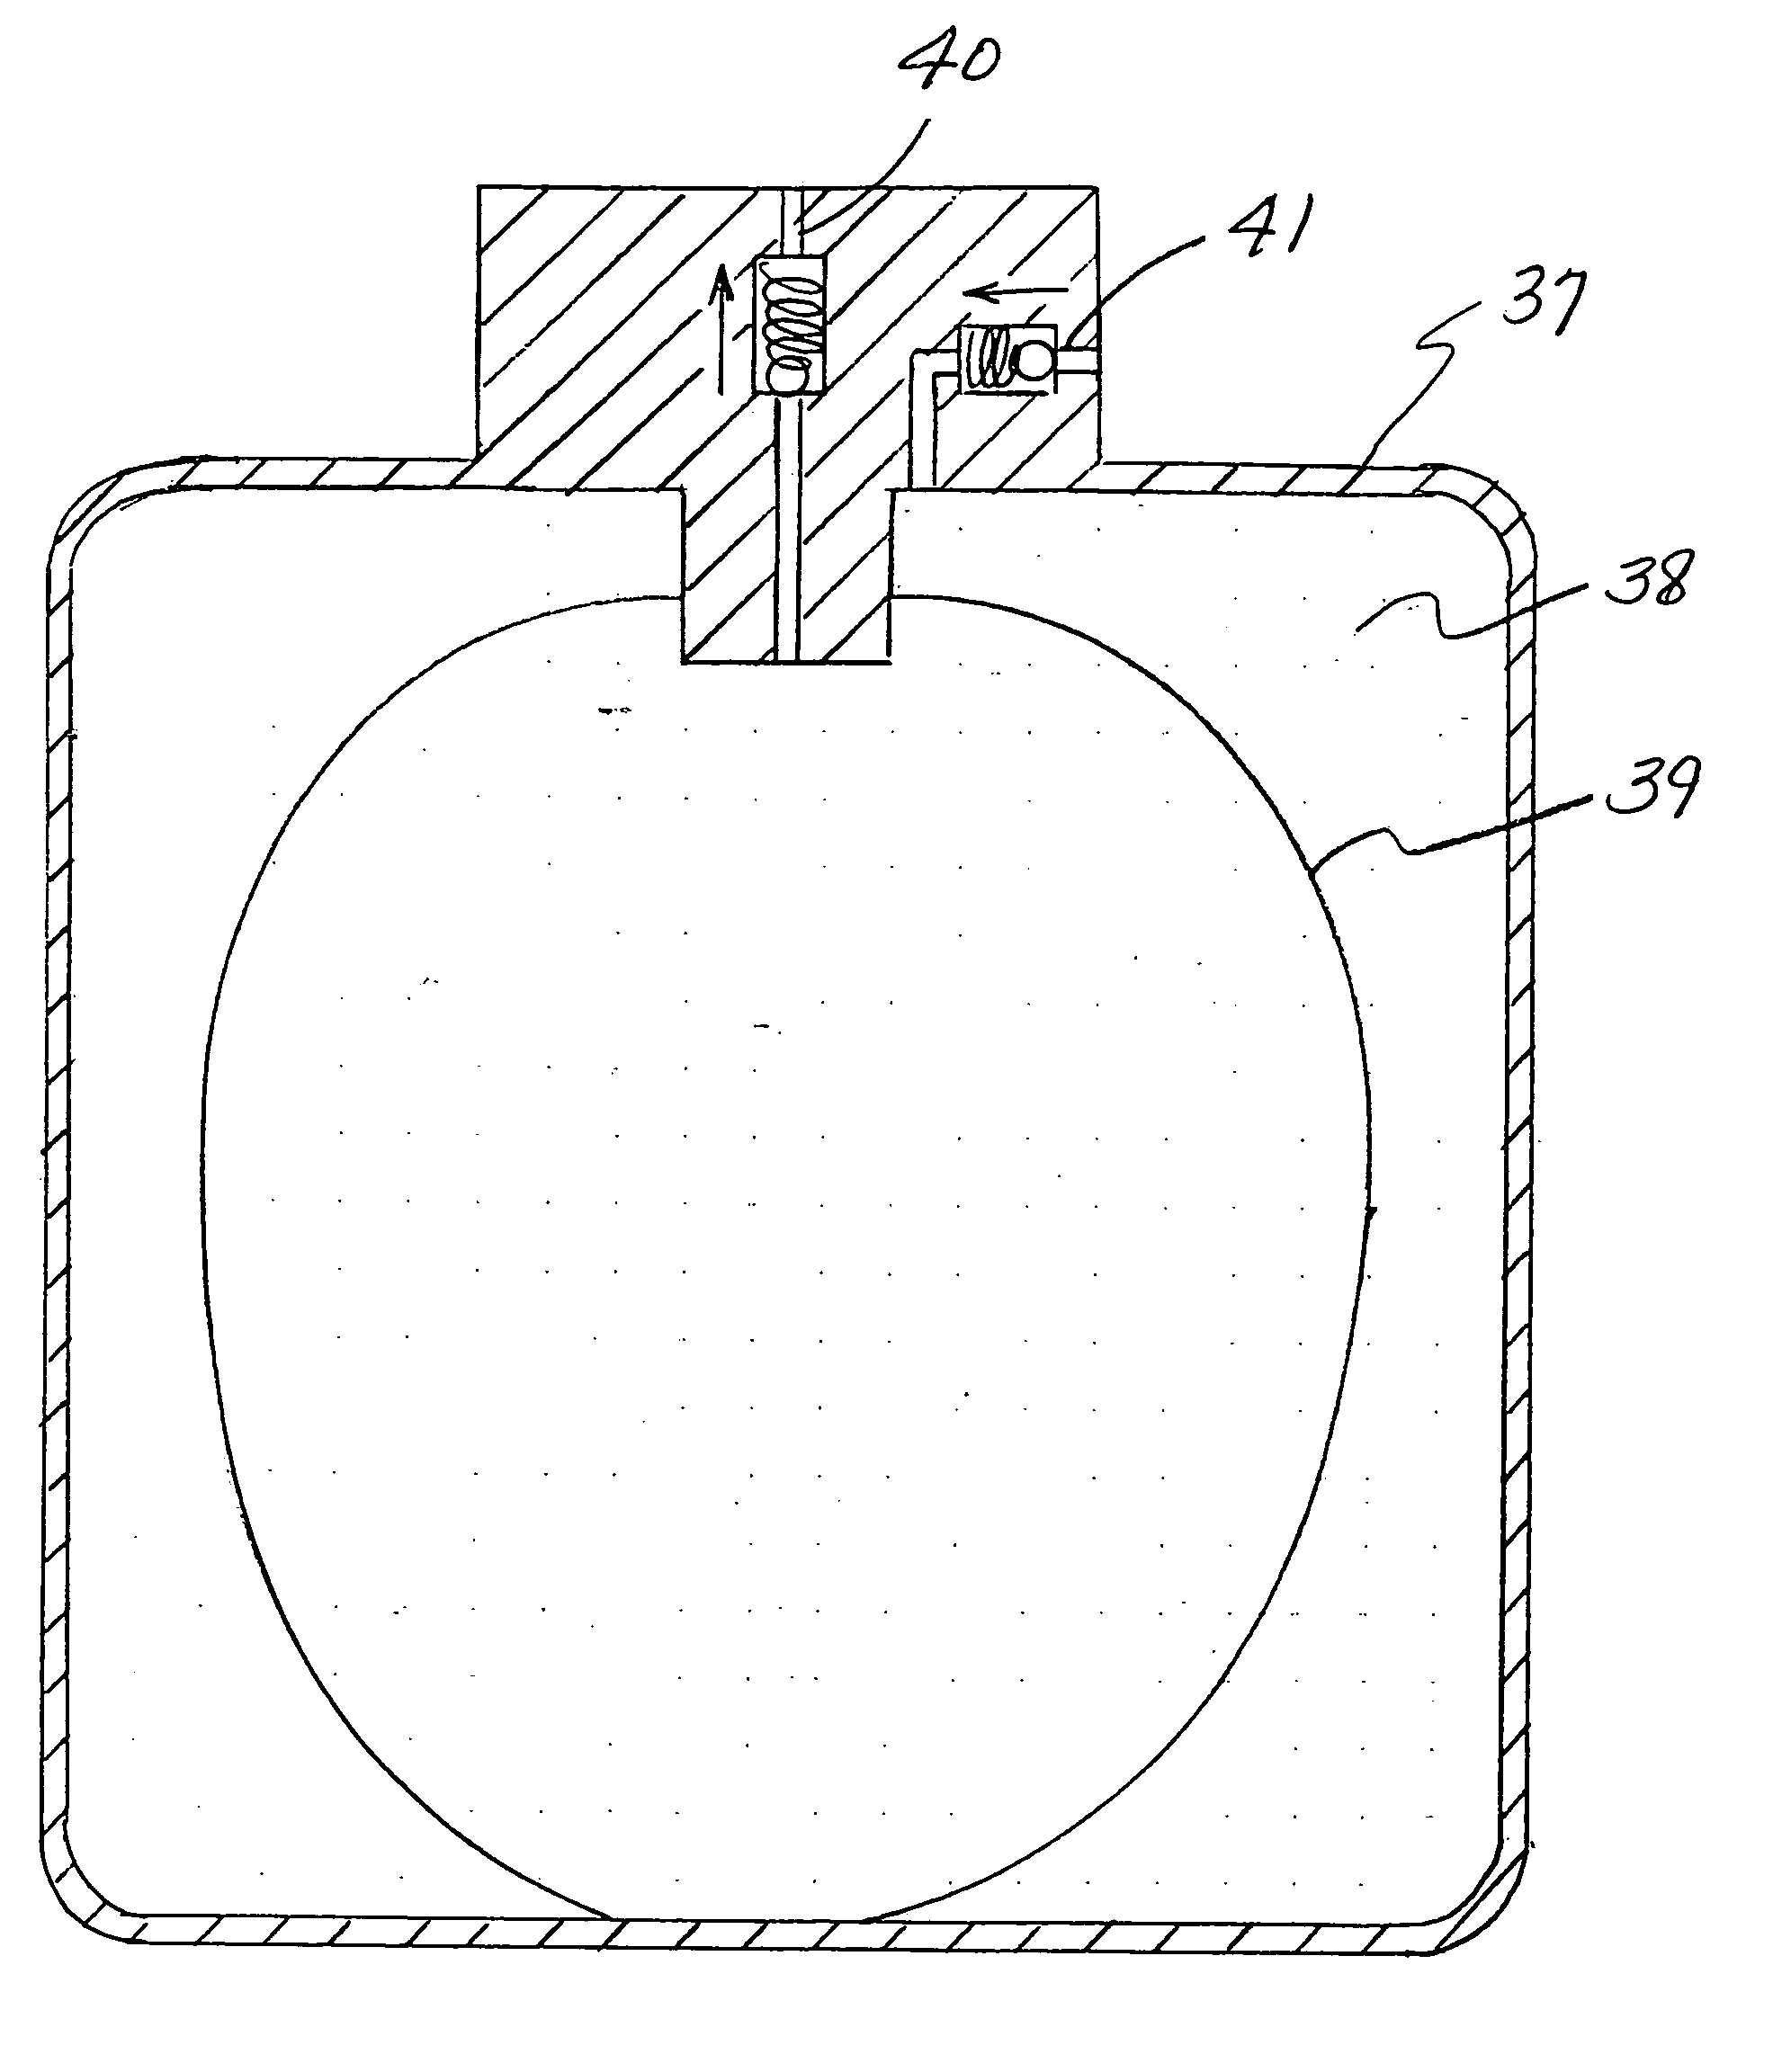 Portable device for dispensing skin treatments